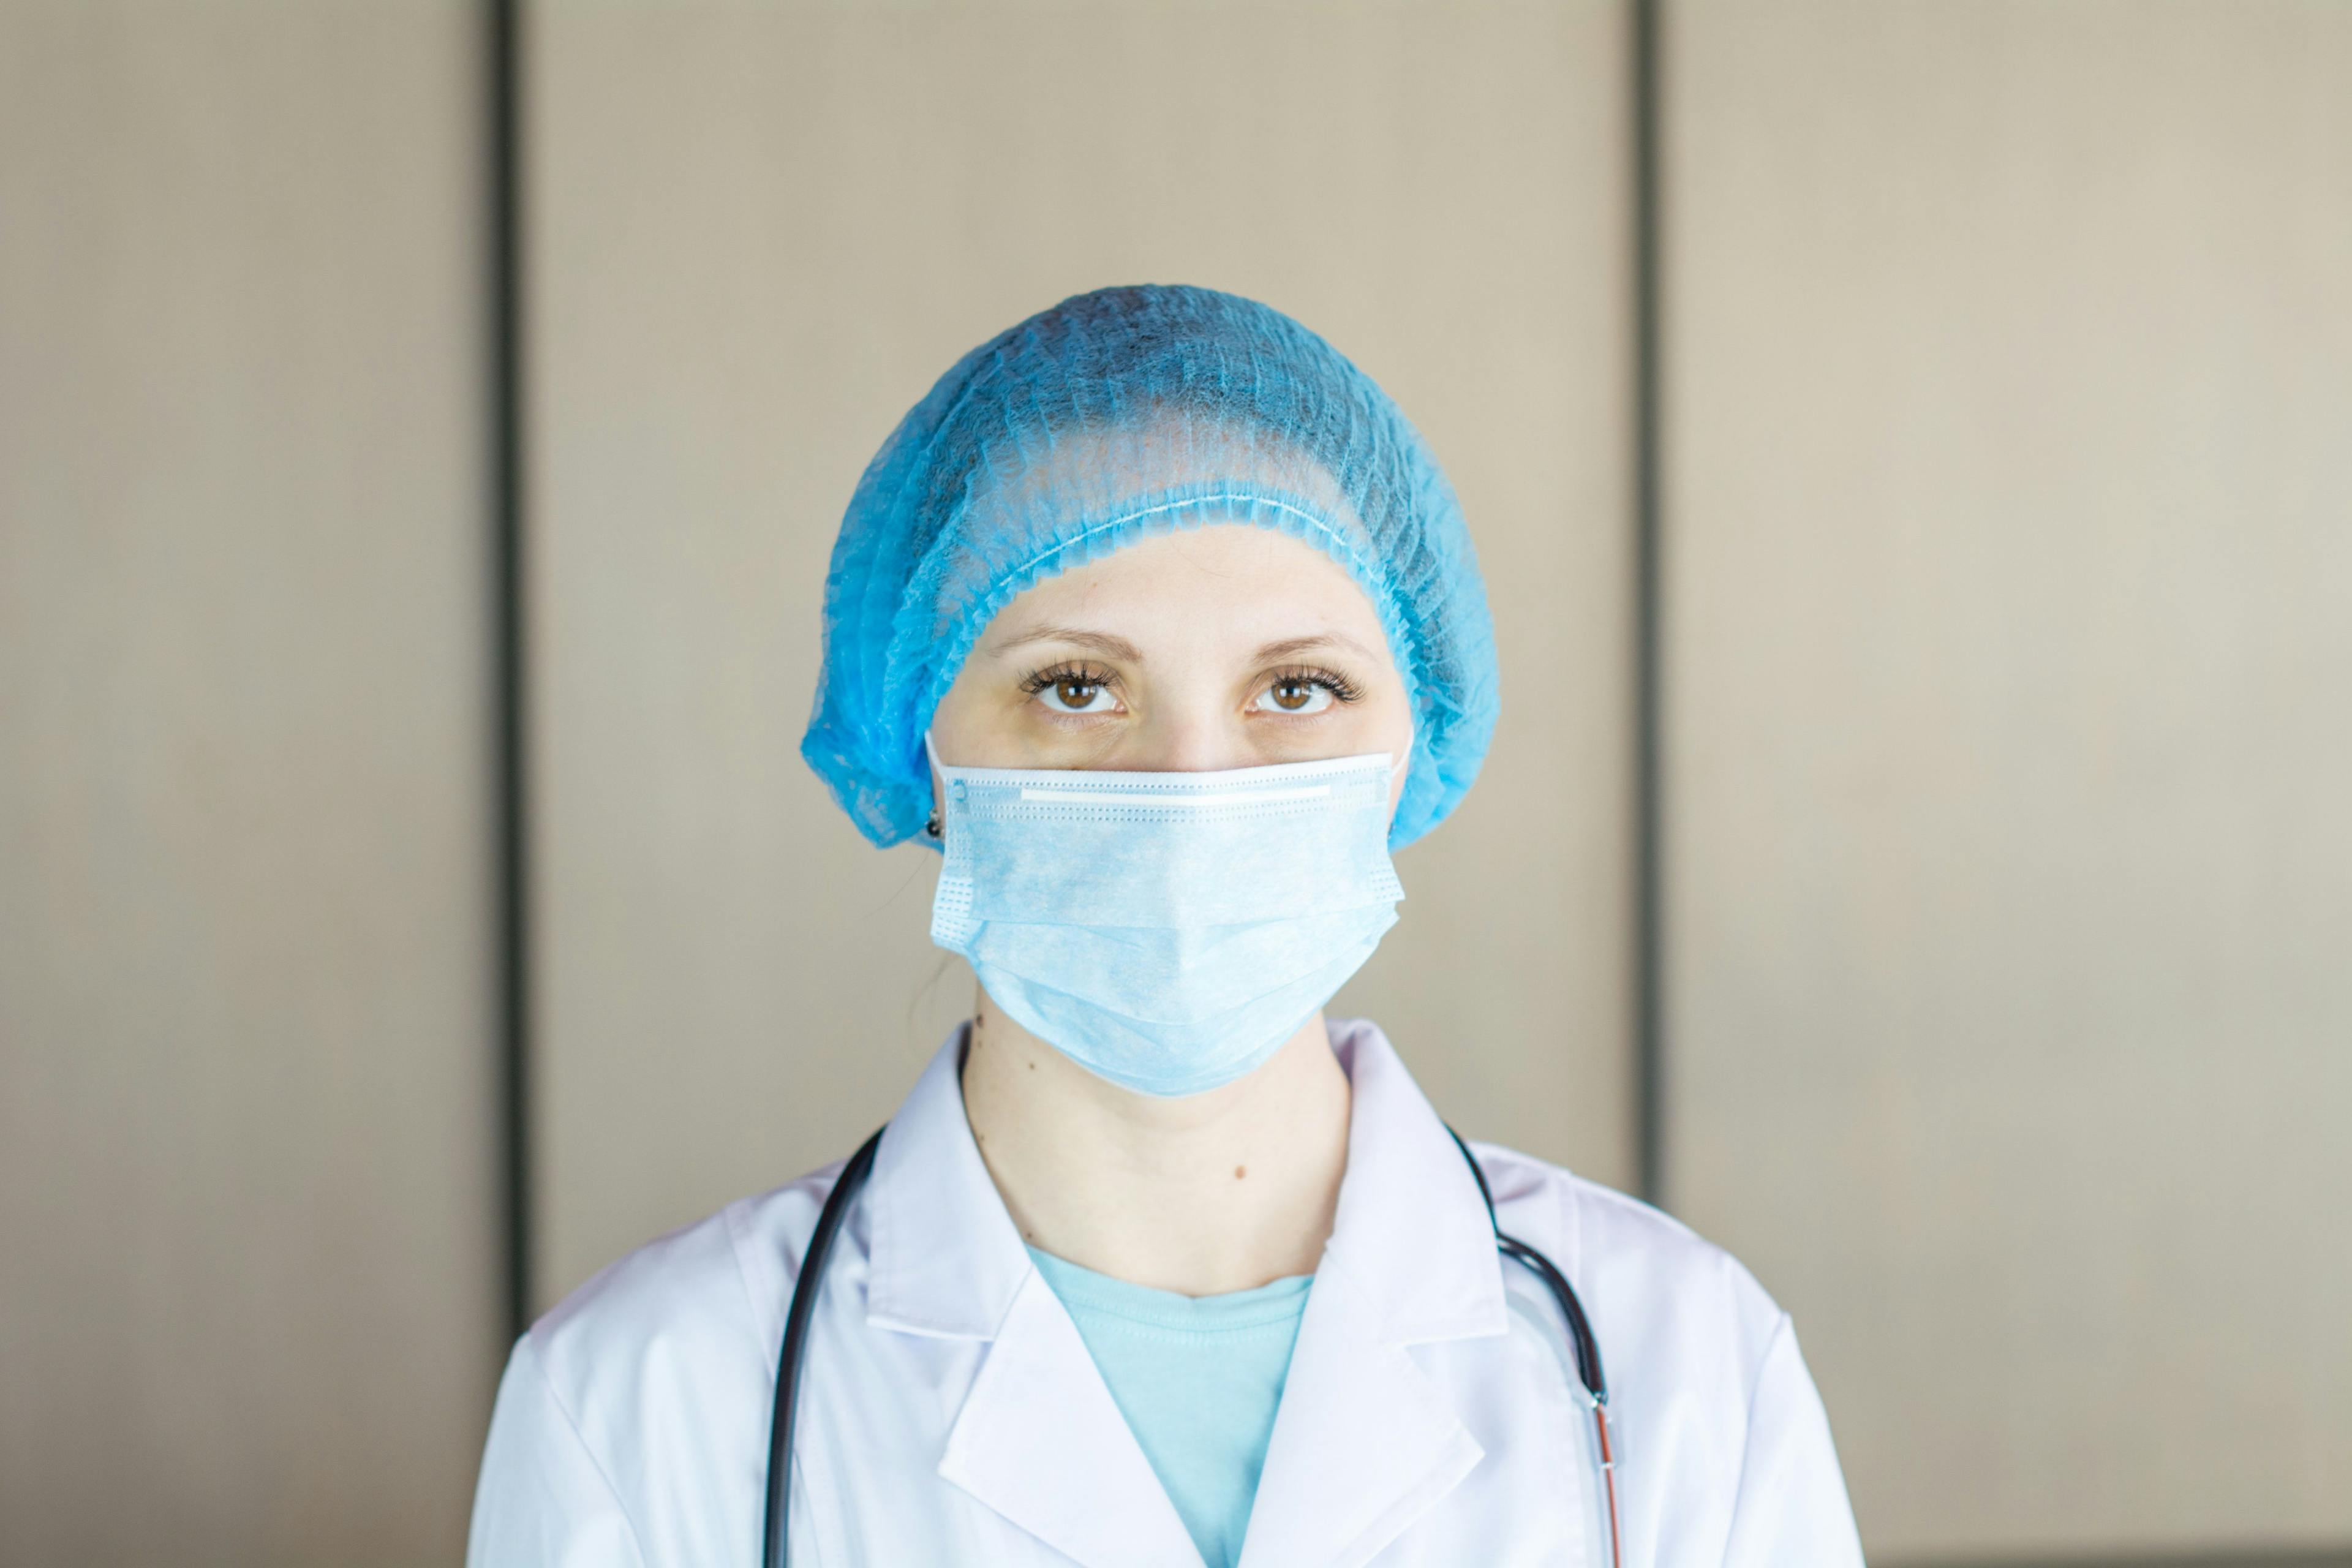 How Does Mask Type Worn During Routine Patient Care Protect Healthcare Personnel Against COVID-19?